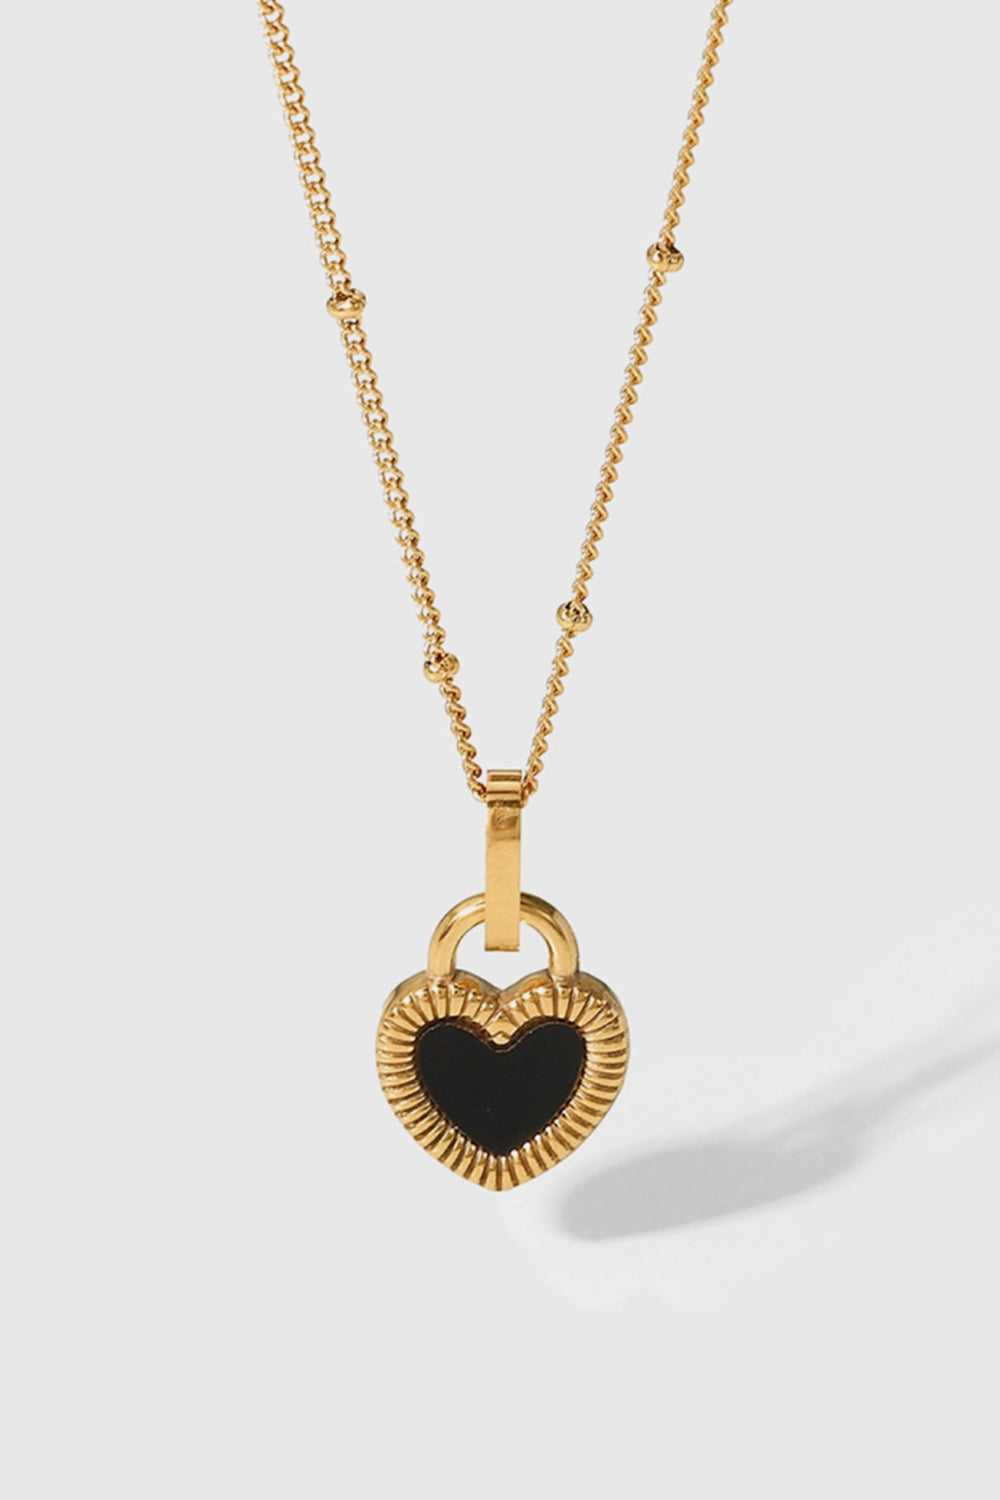 Contrast Heart Pendant Necklace - Necklaces - FITGGINS